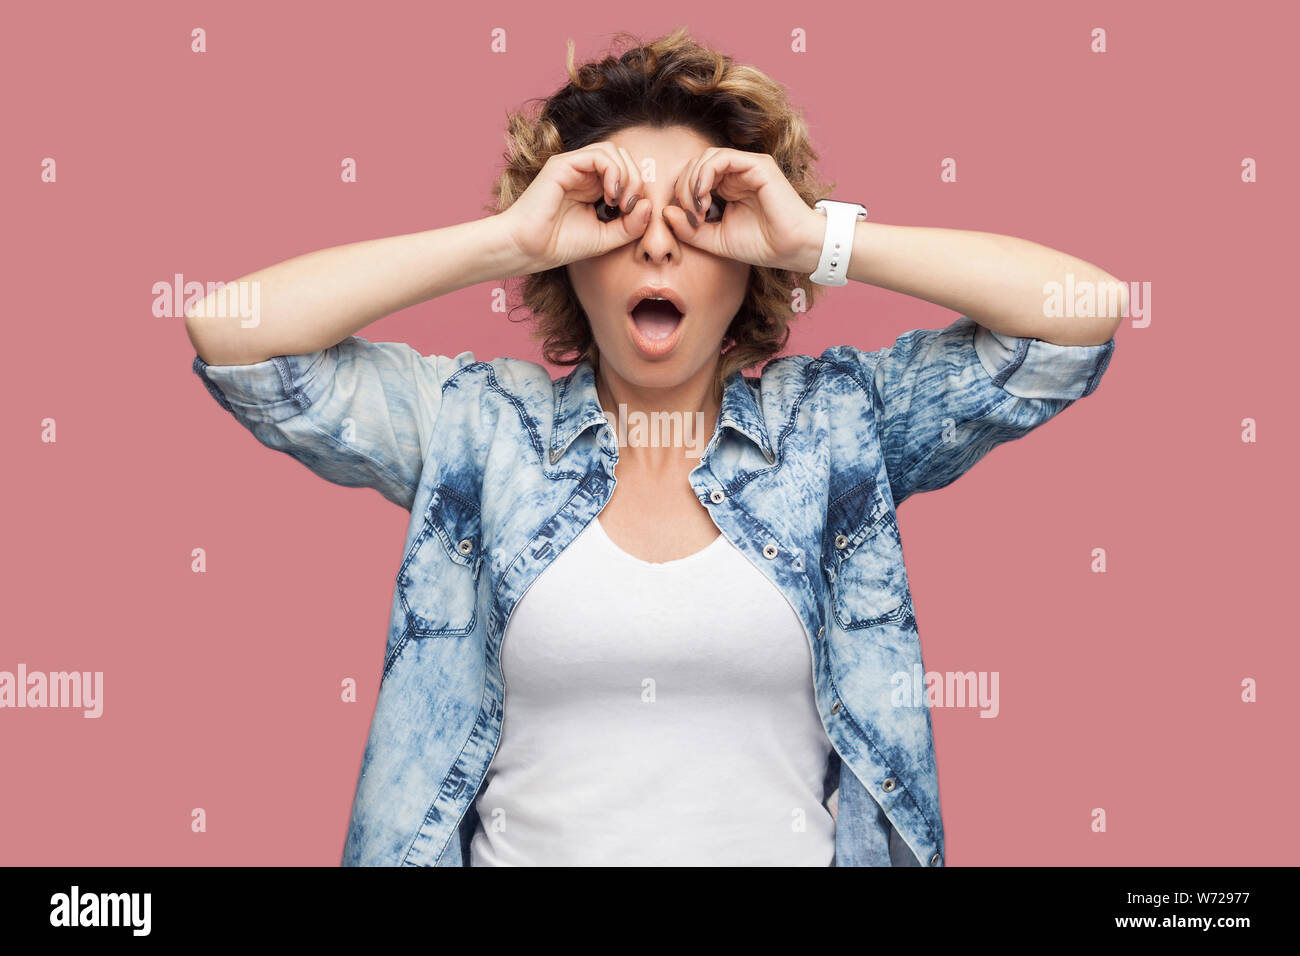 Portrait of shocked funny young woman with curly hair in blue shirt standing with binoculars gesture hands on eye and looking at camera with amazed fa Stock Photo